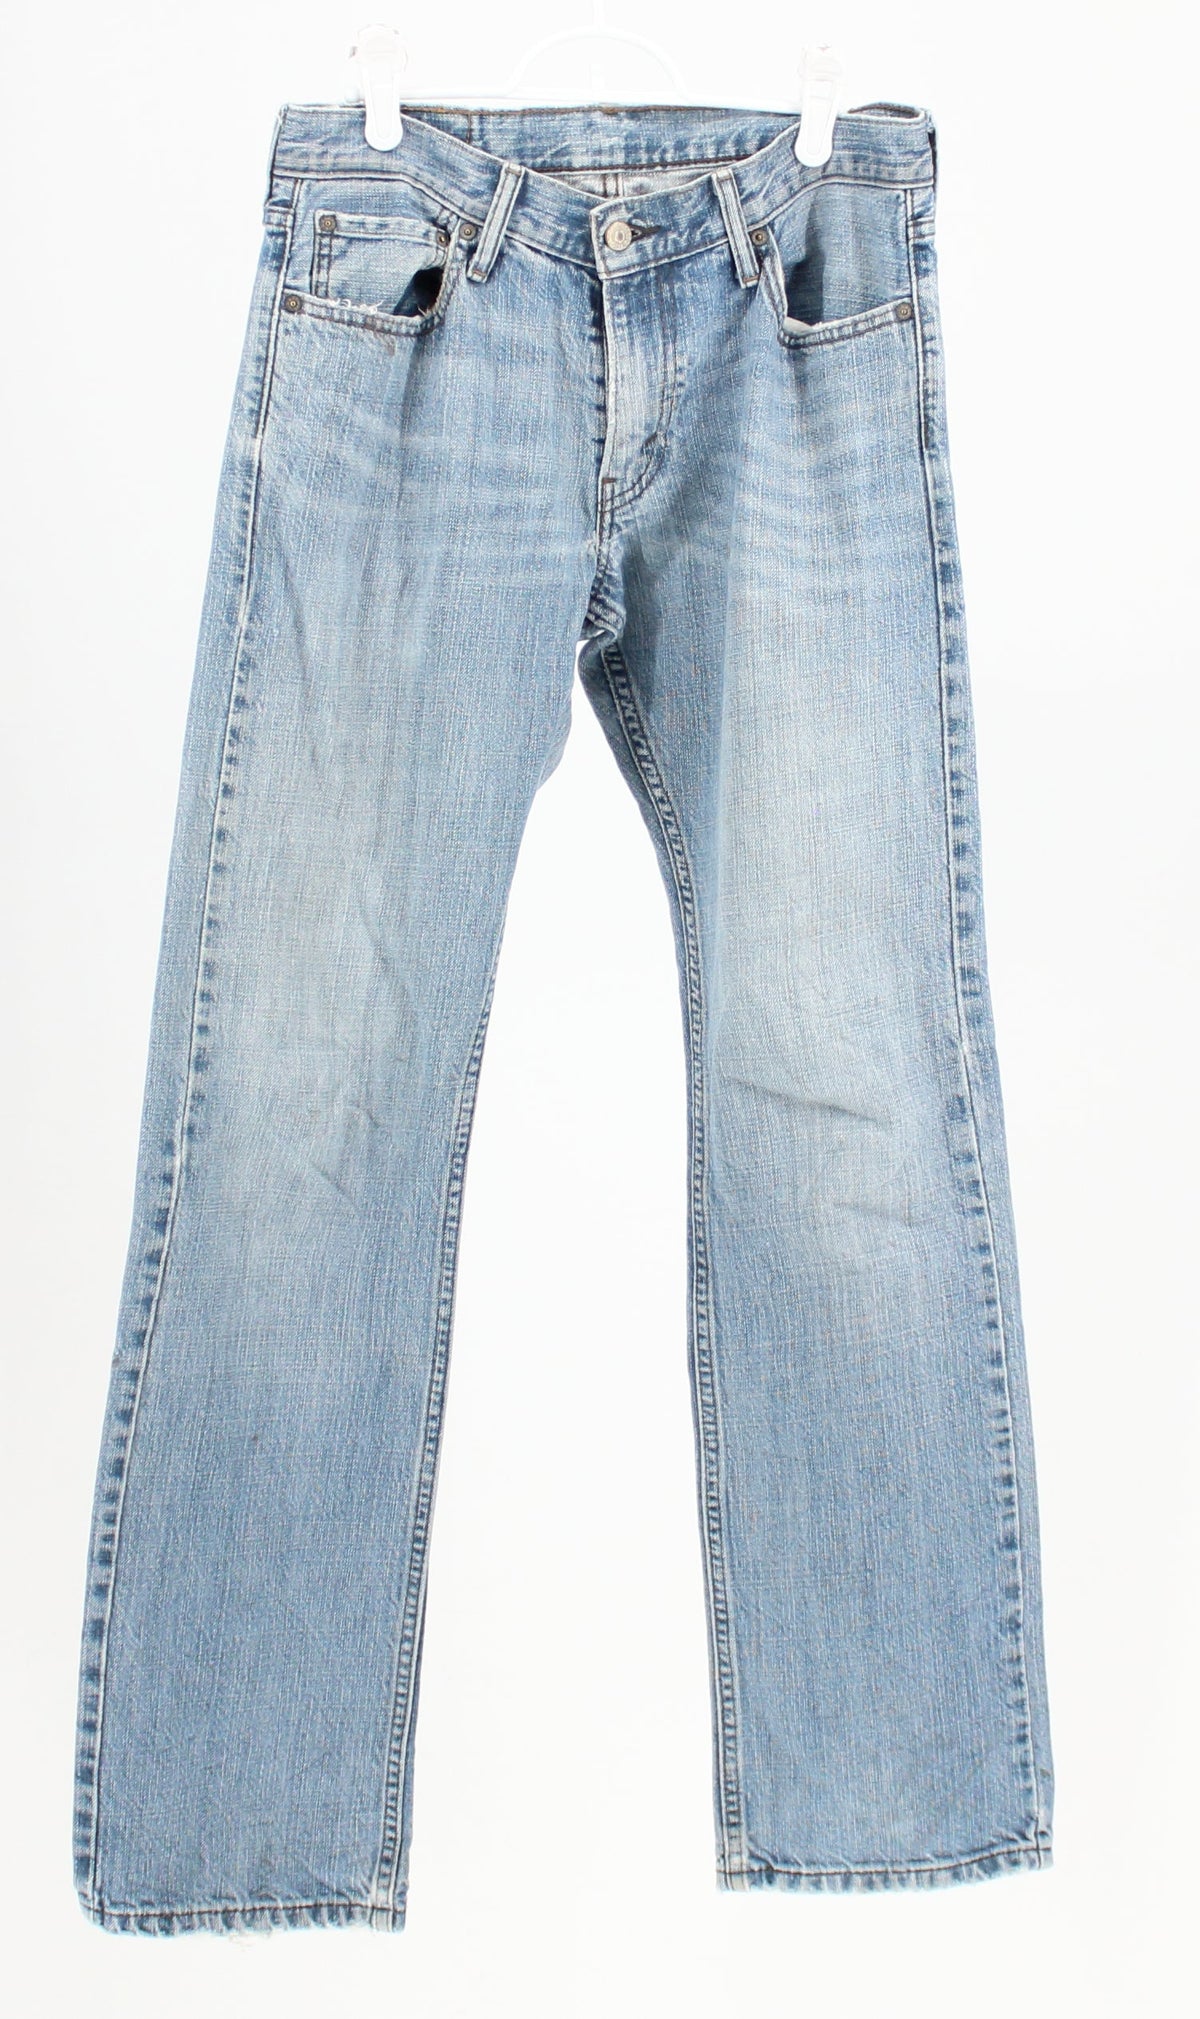 Shop Levis 514 Distressed Straight Leg with red tag Thriftezee